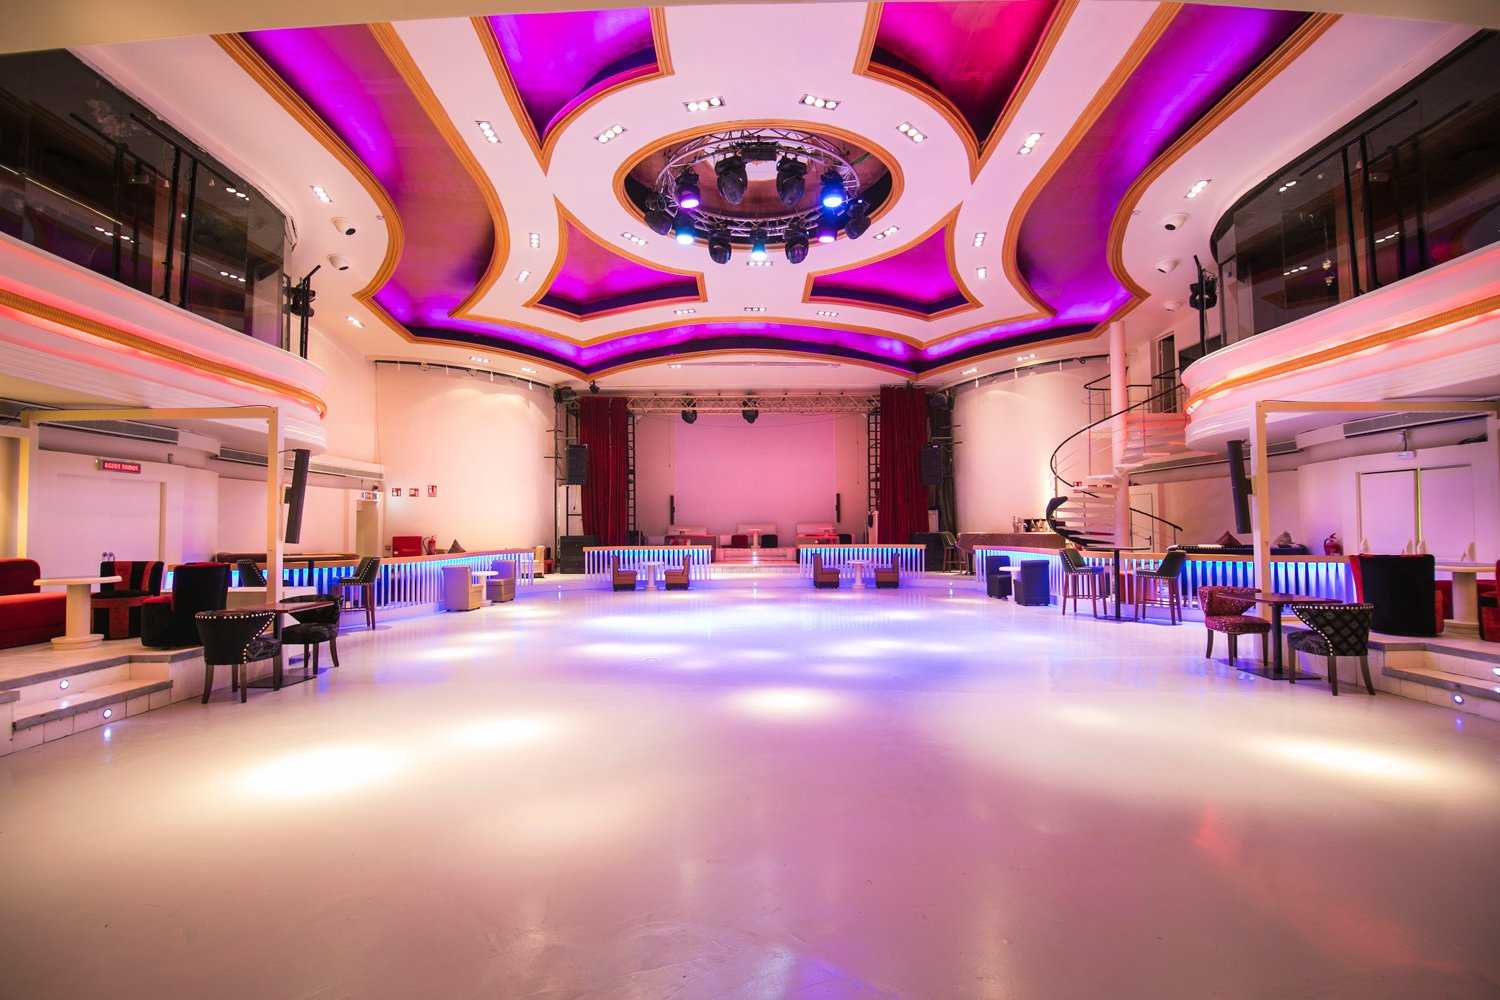 Dance floor and stage